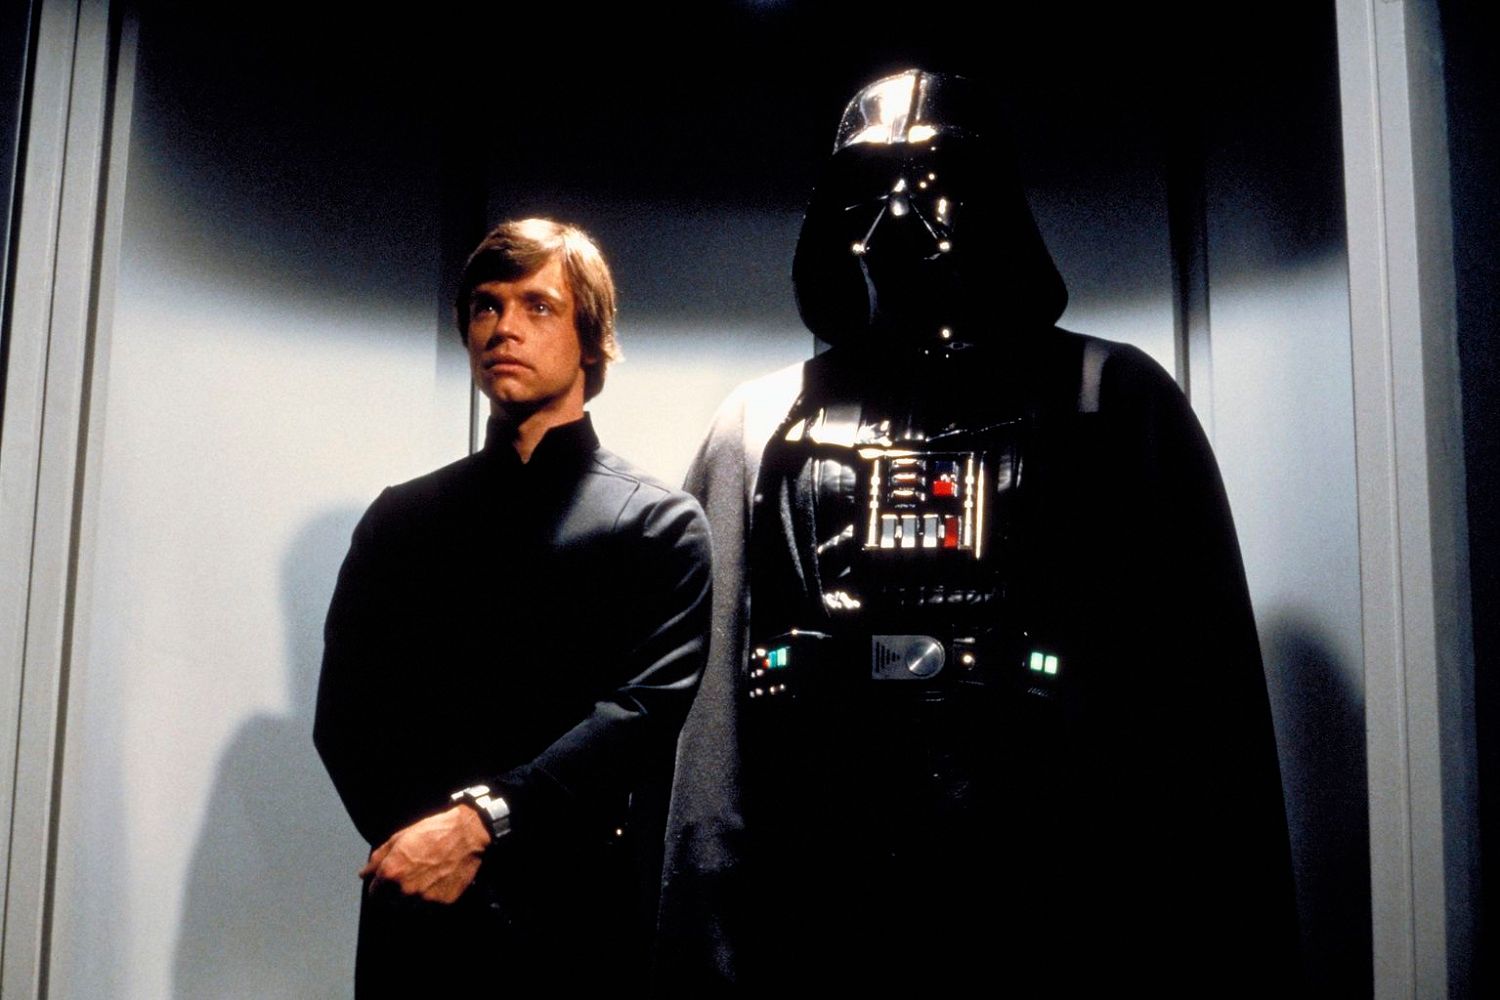 How to Watch Every 'Star Wars' Movie and TV Series In Order